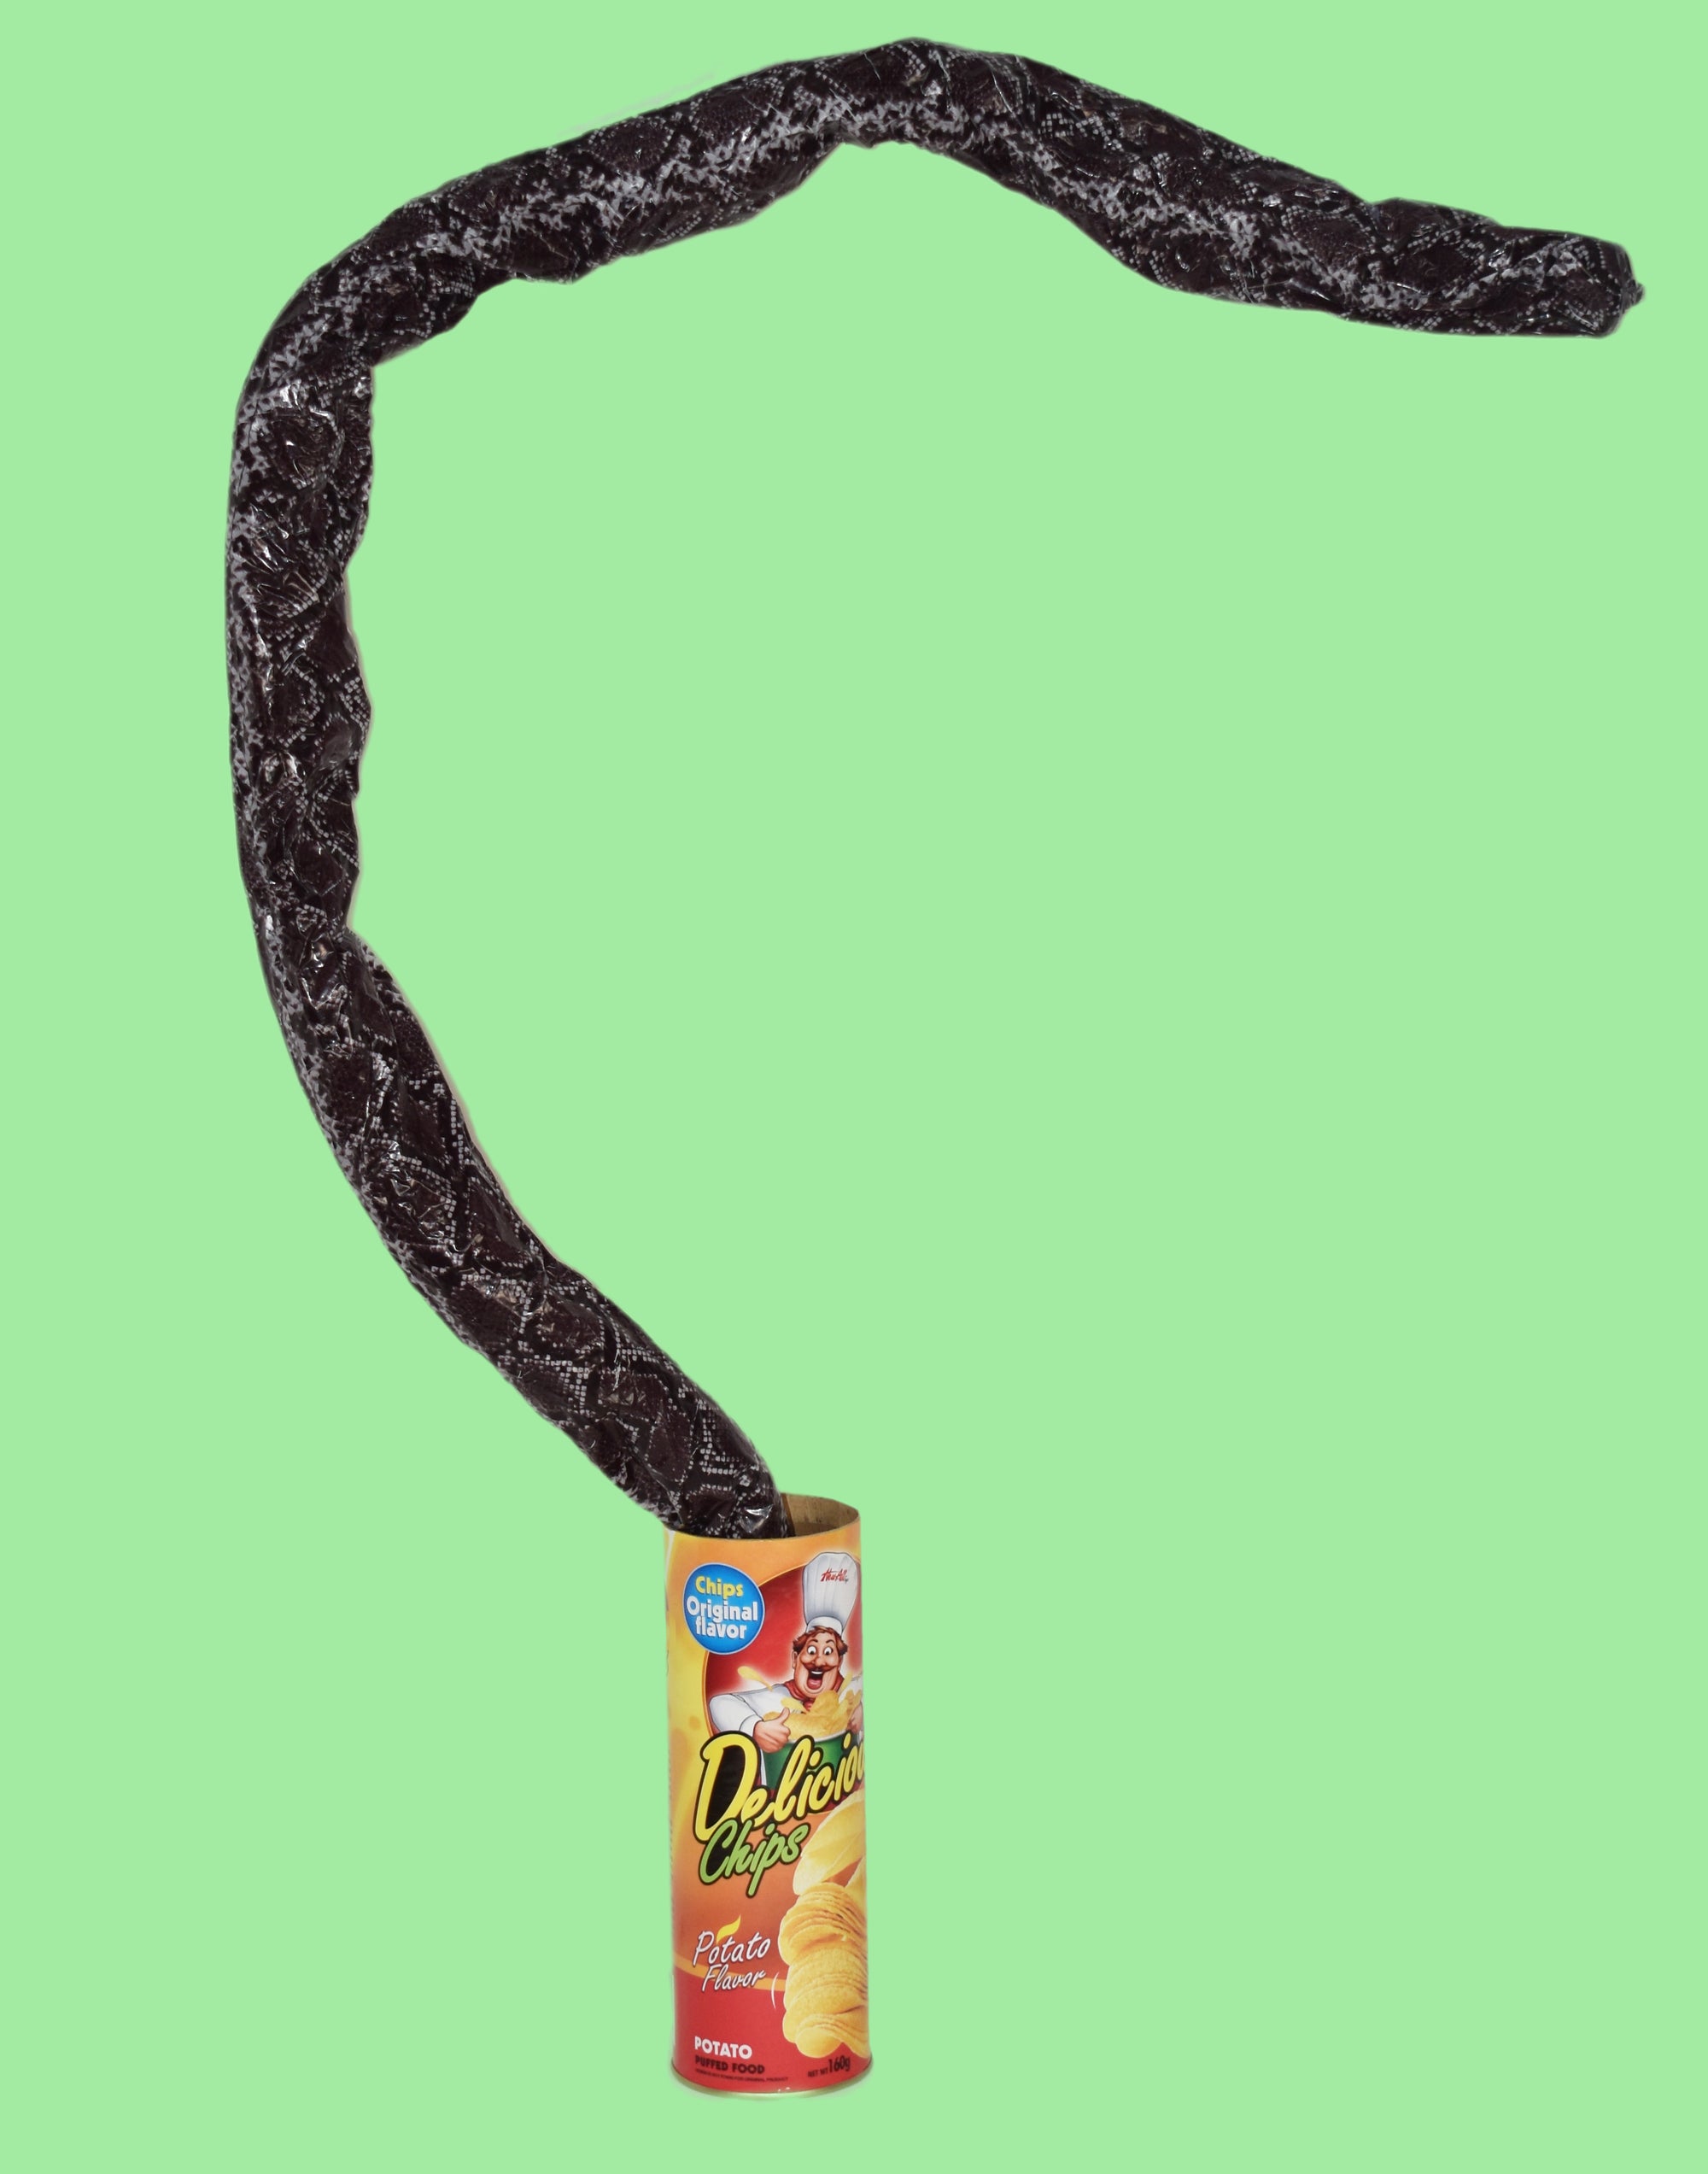 SNAKE IN A CAN